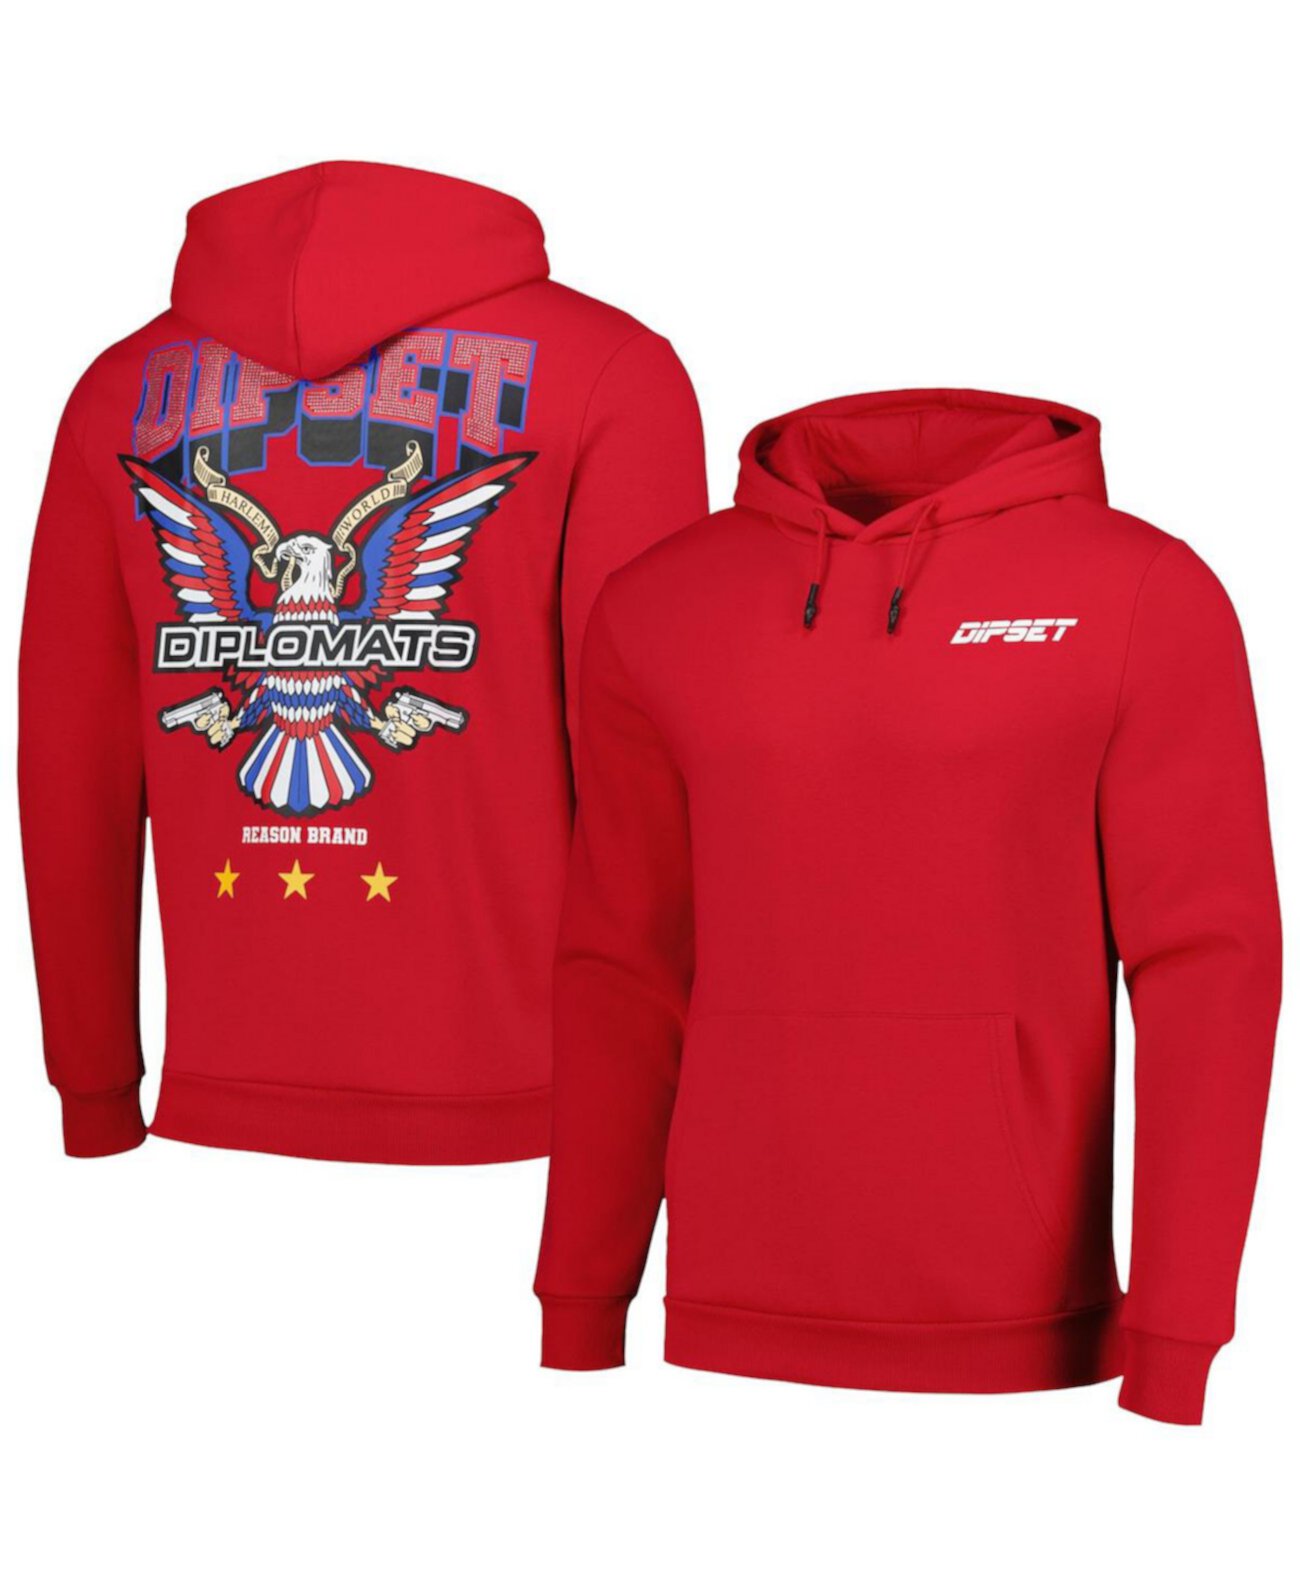 Men's and Women's Red The Diplomats Dipset Members Pullover Hoodie Reason